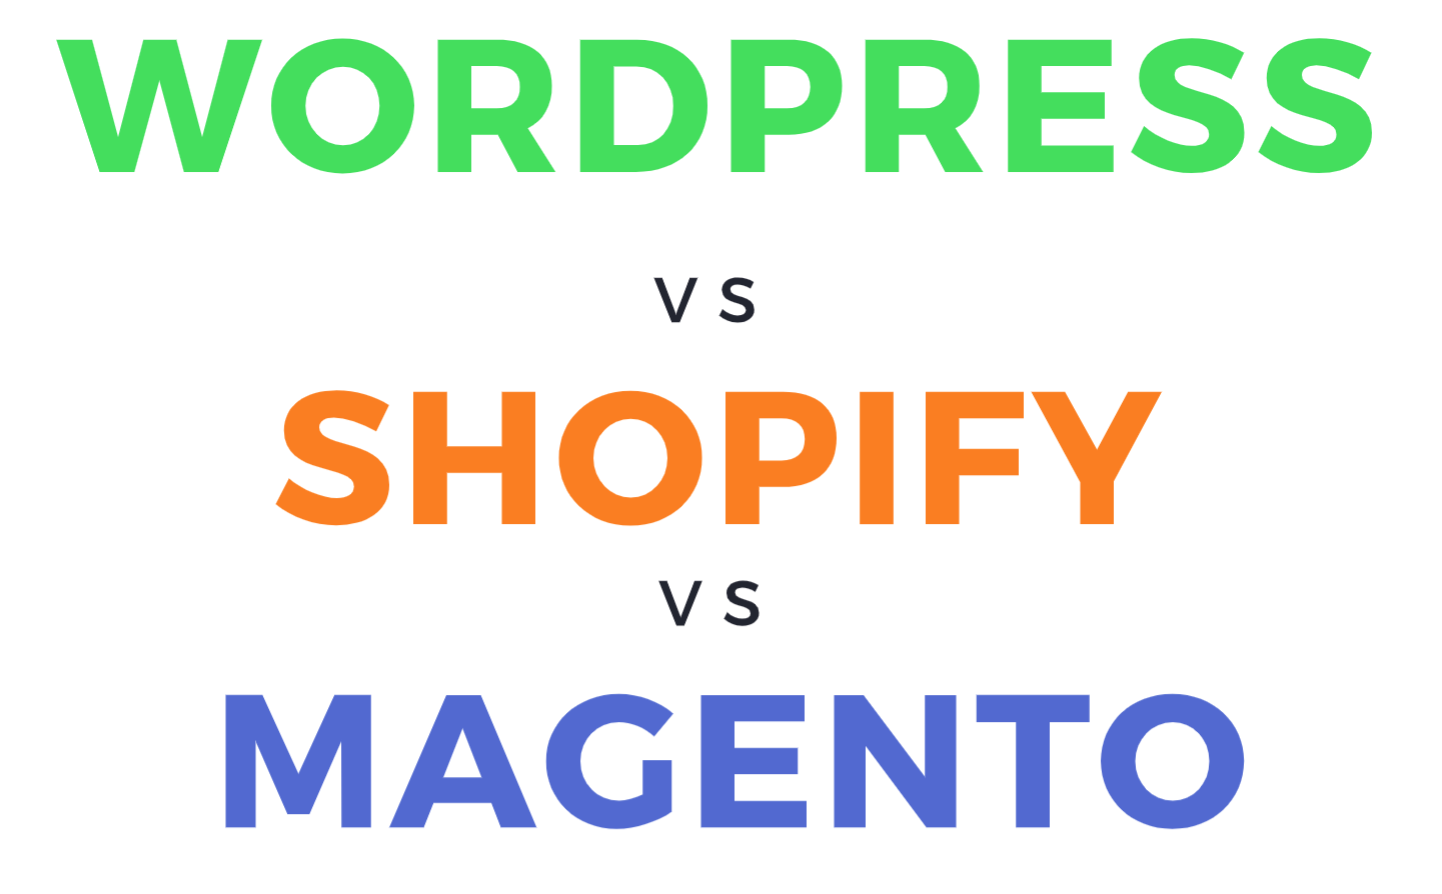 WordPress vs. Magento vs. Shopify: Which is best for your e-commerce website?